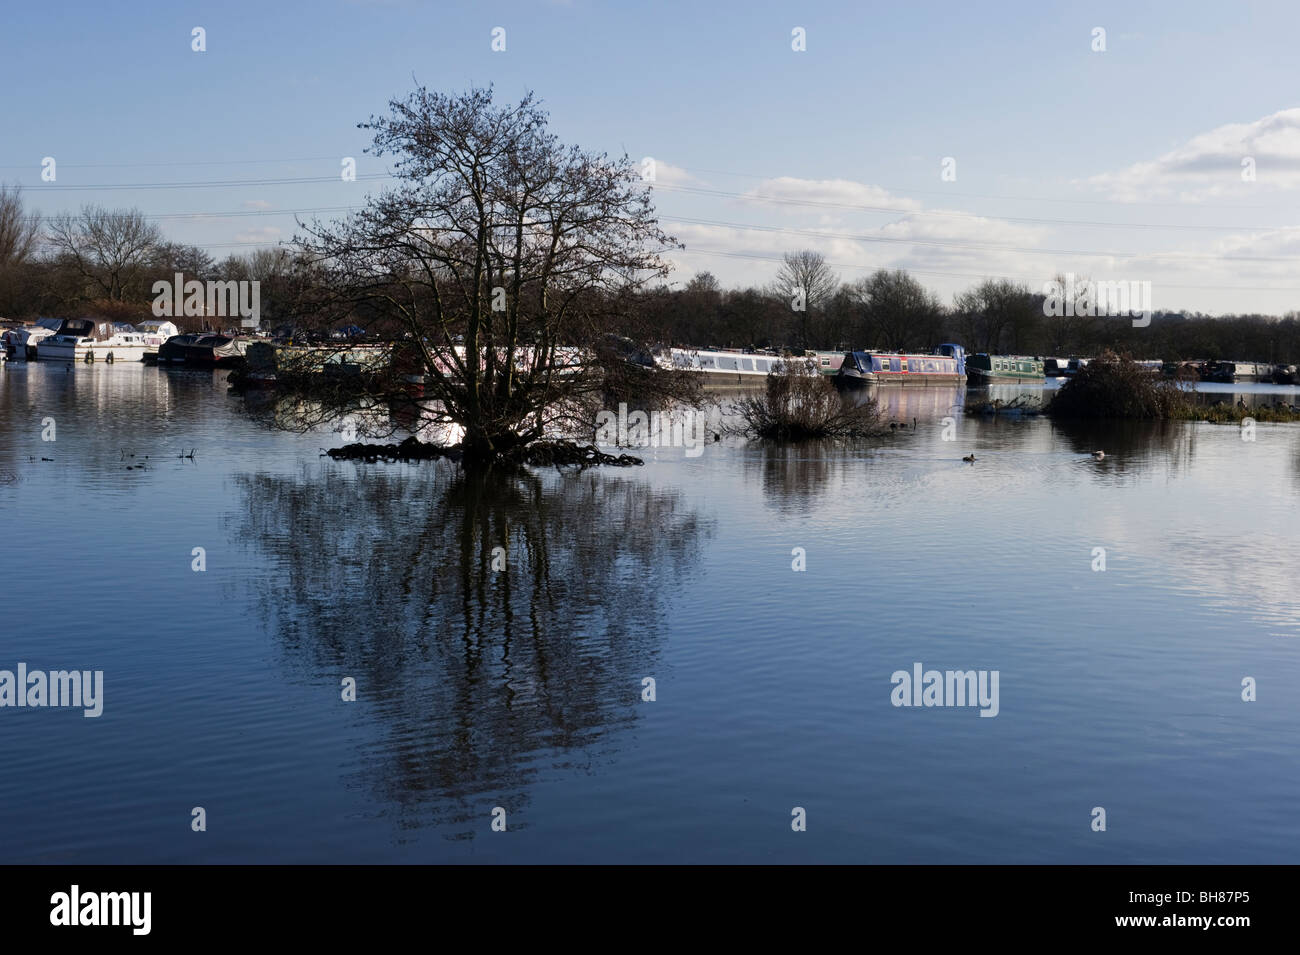 Tree reflections in a calm expanse of water in a Winter scene, narrow boats moored in the distance Stock Photo